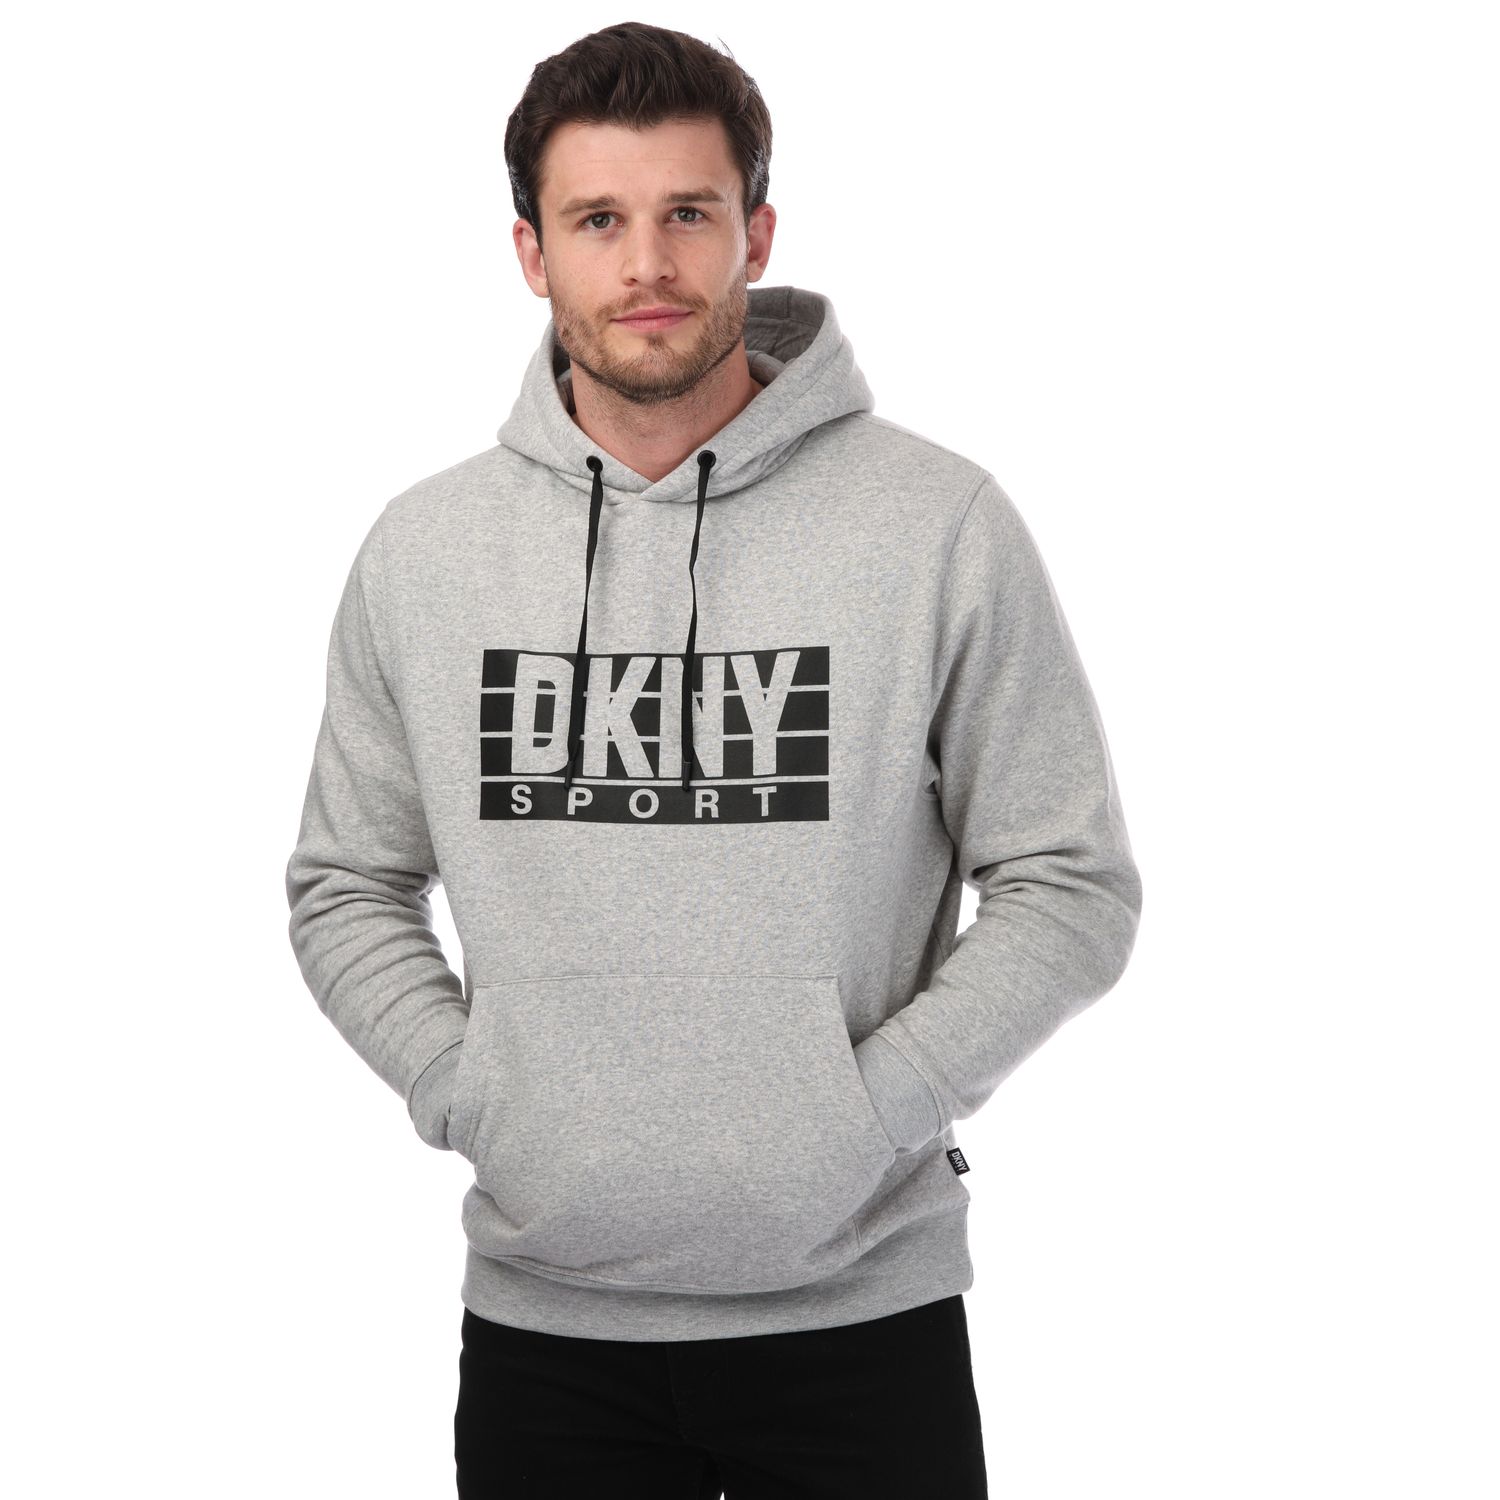 Silver DKNY Mens Stamp Hoody - Get The Label